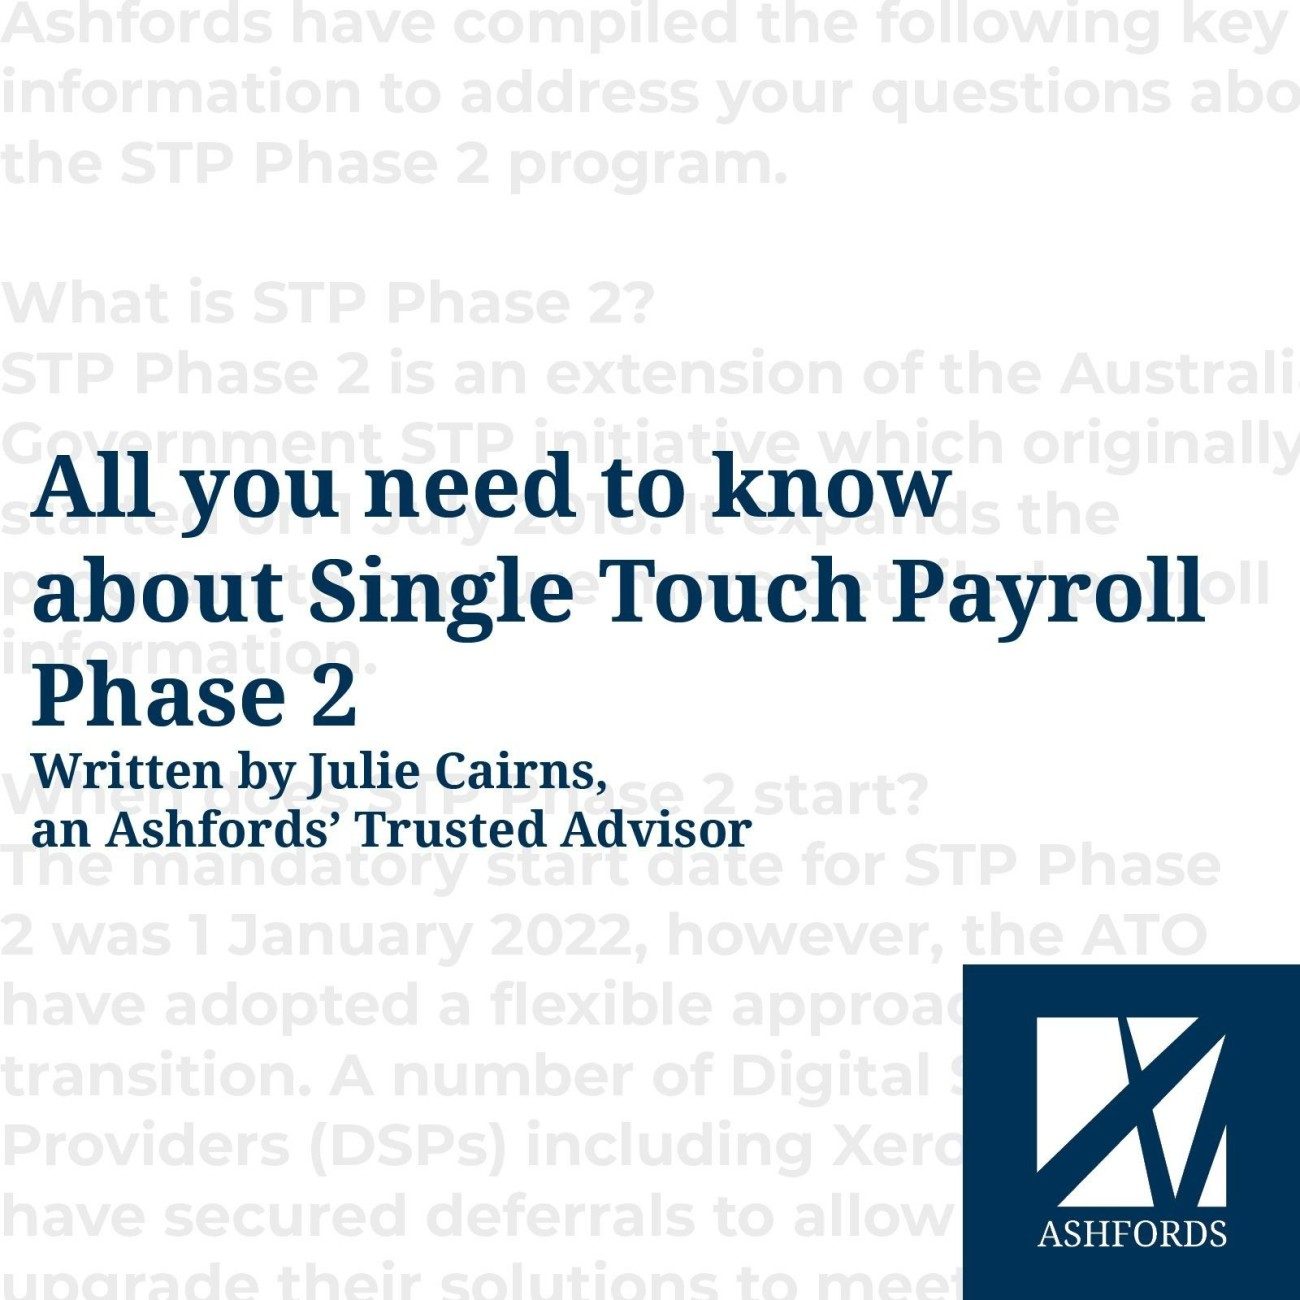 All you need to know about Single Touch Payroll Phase 2